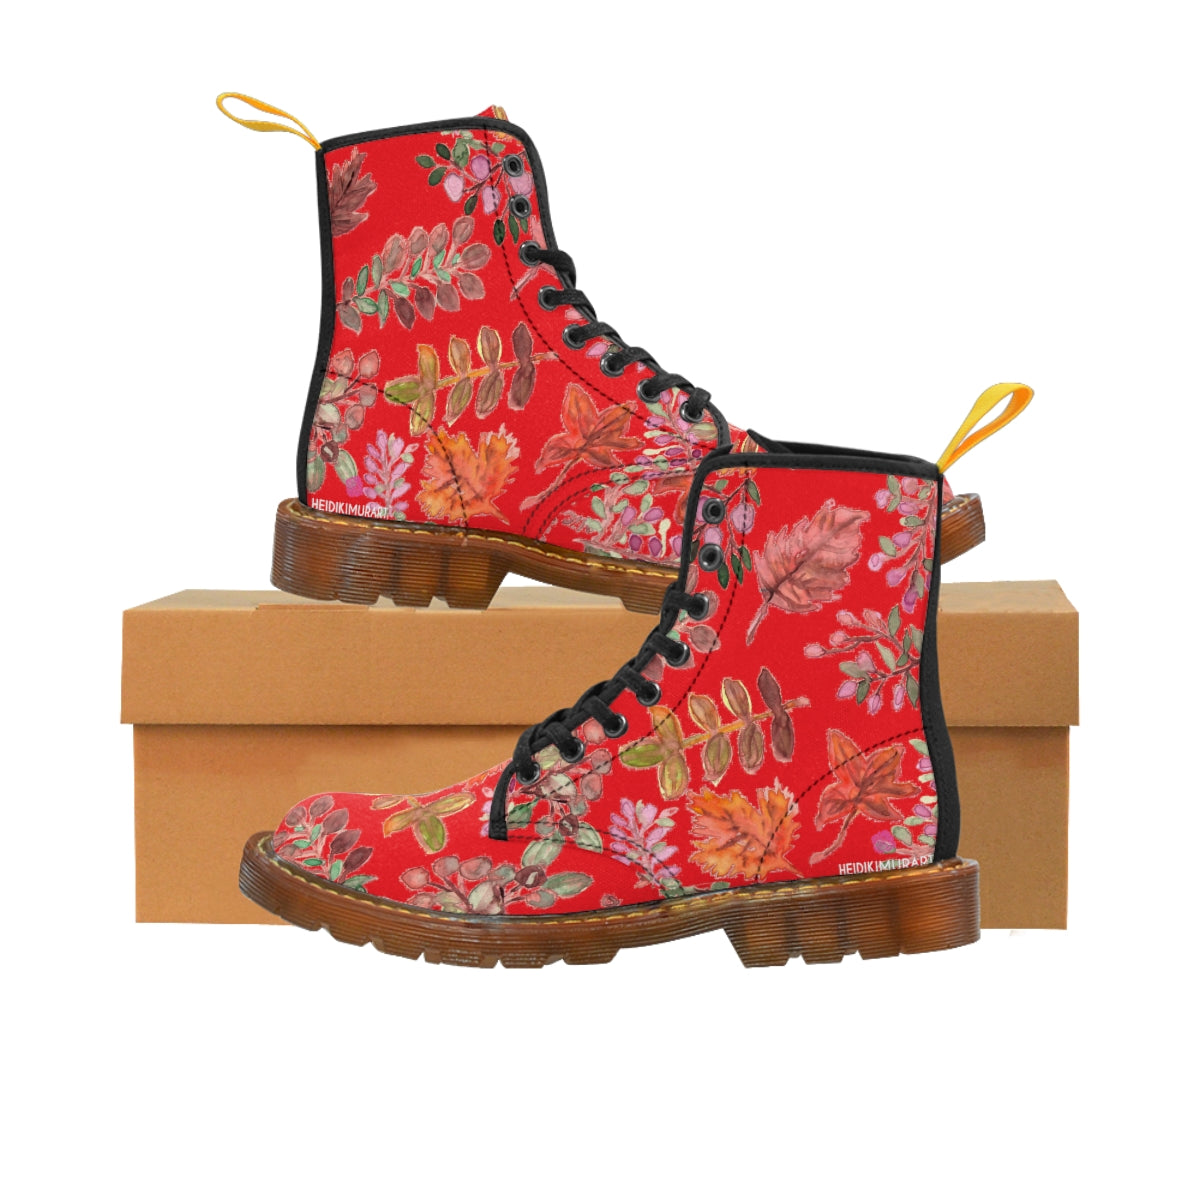 Red Fall Leaves Women's Boots, Autumn Fall Leaves Print Women's Boots, Combat Boots, Designer Women's Winter Lace-up Toe Cap Hiking Boots Shoes For Women (US Size 6.5-11) Fall Leaves Fashion Canvas Shoes, Fall Leaves Print Winter Boots, Autumn Leaves Printed Boots For Ladies, Colorful Boots For Women